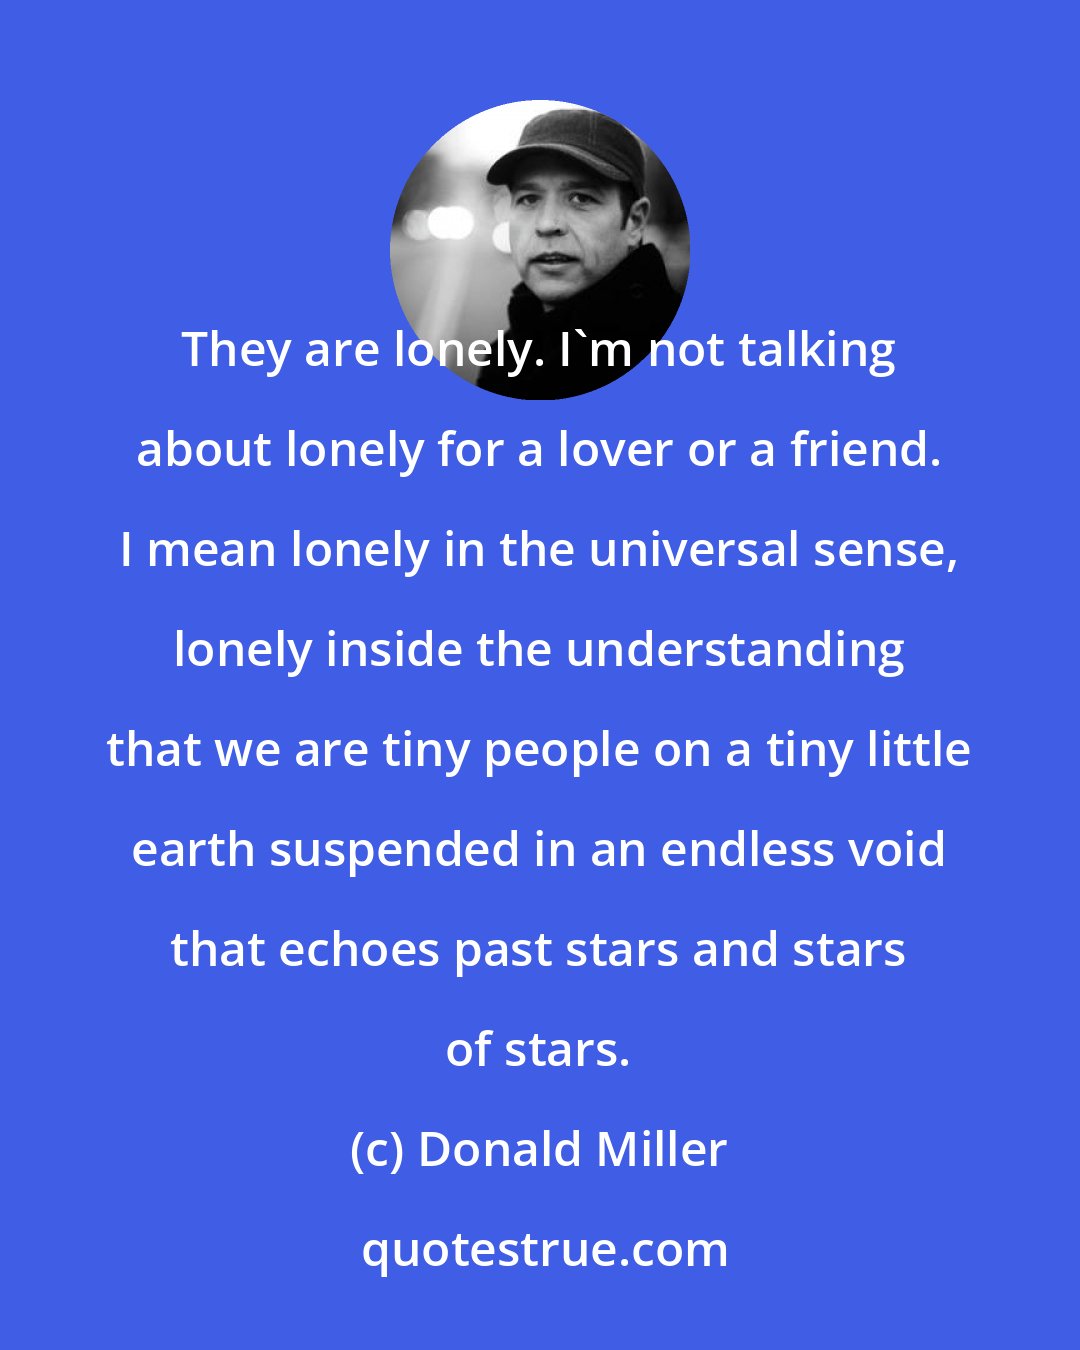 Donald Miller: They are lonely. I'm not talking about lonely for a lover or a friend. I mean lonely in the universal sense, lonely inside the understanding that we are tiny people on a tiny little earth suspended in an endless void that echoes past stars and stars of stars.